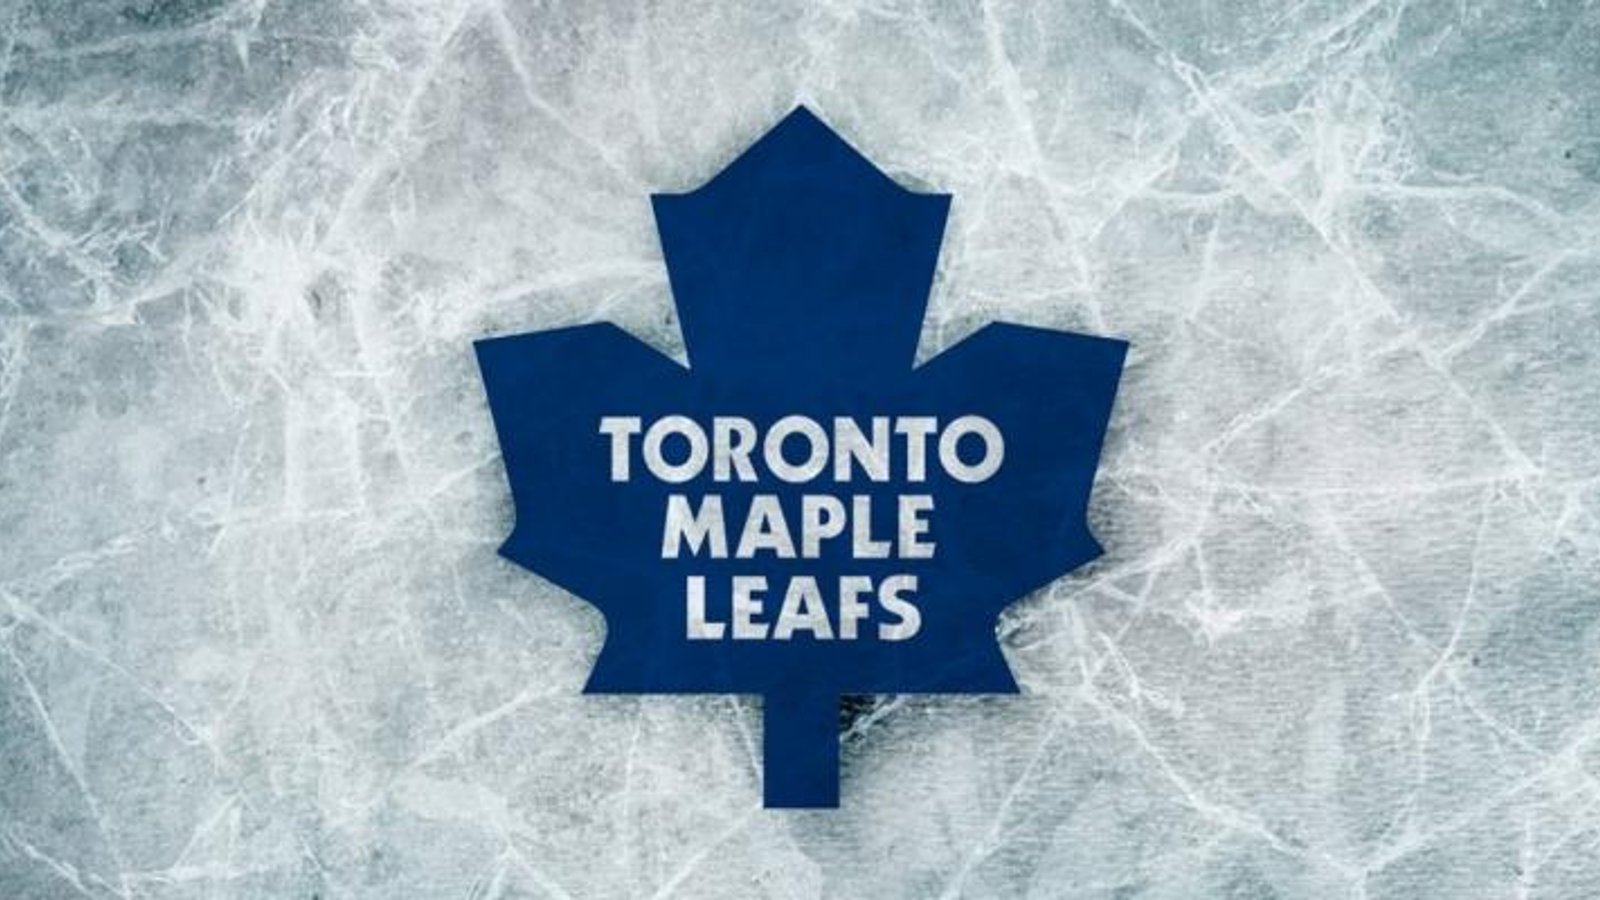 Breaking: The new Maple Leafs uniforms have been leaked!